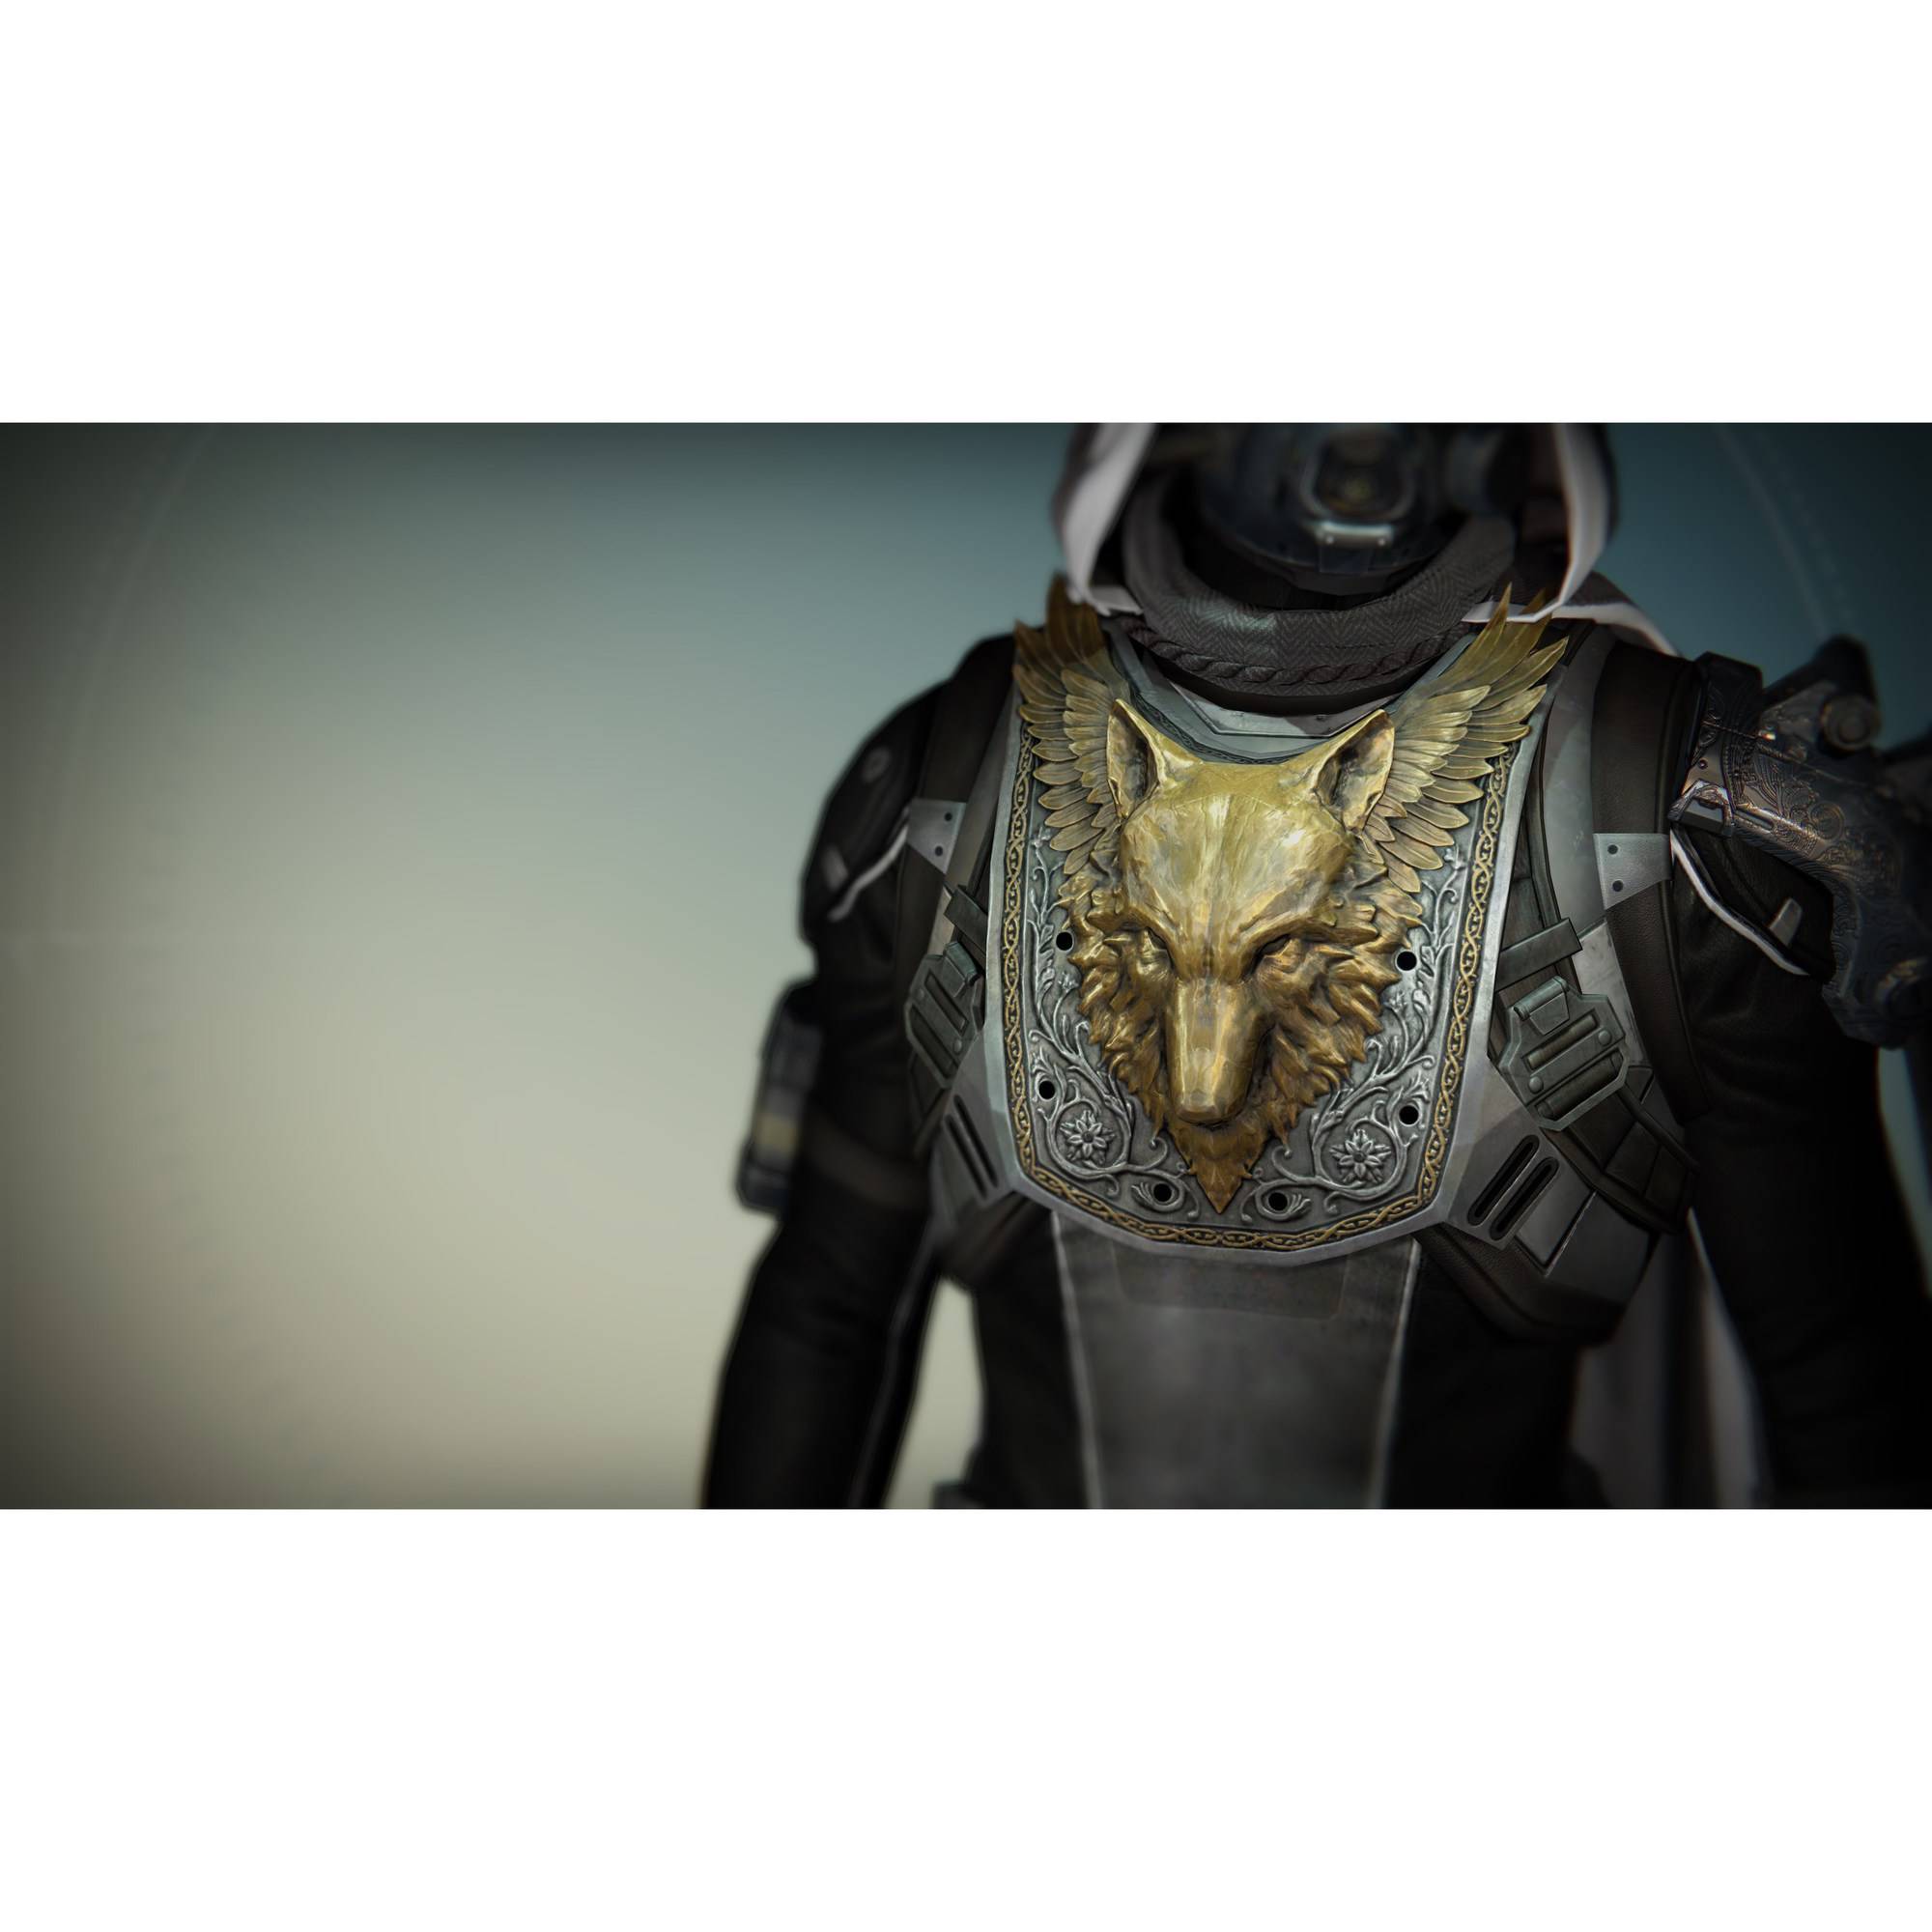 Destiny: The Taken King Legendary Edition, Activision, PlayStation 4, 047875874428 - image 14 of 31